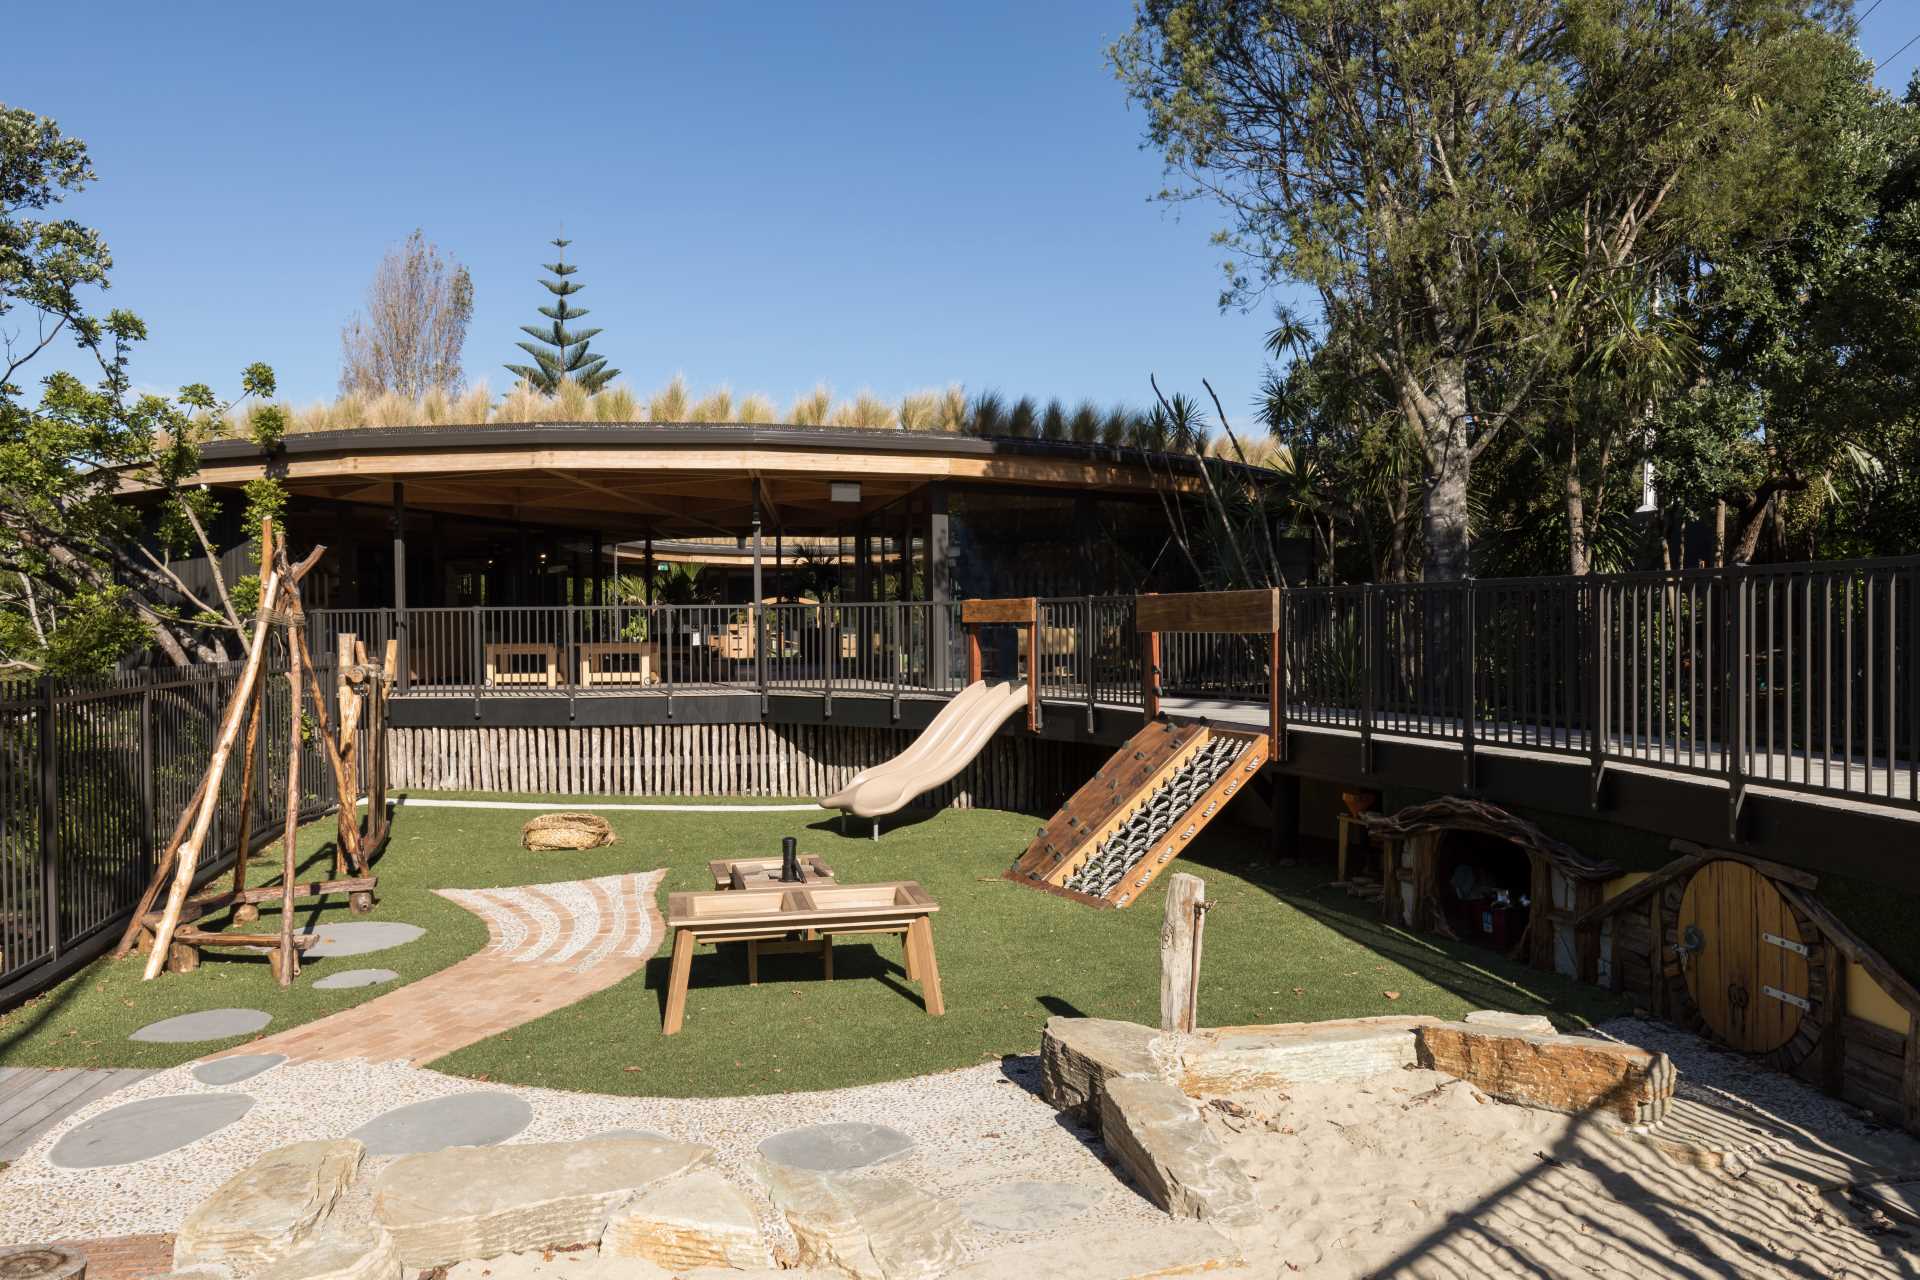 A modern playground at an early learning centre with a green roof.